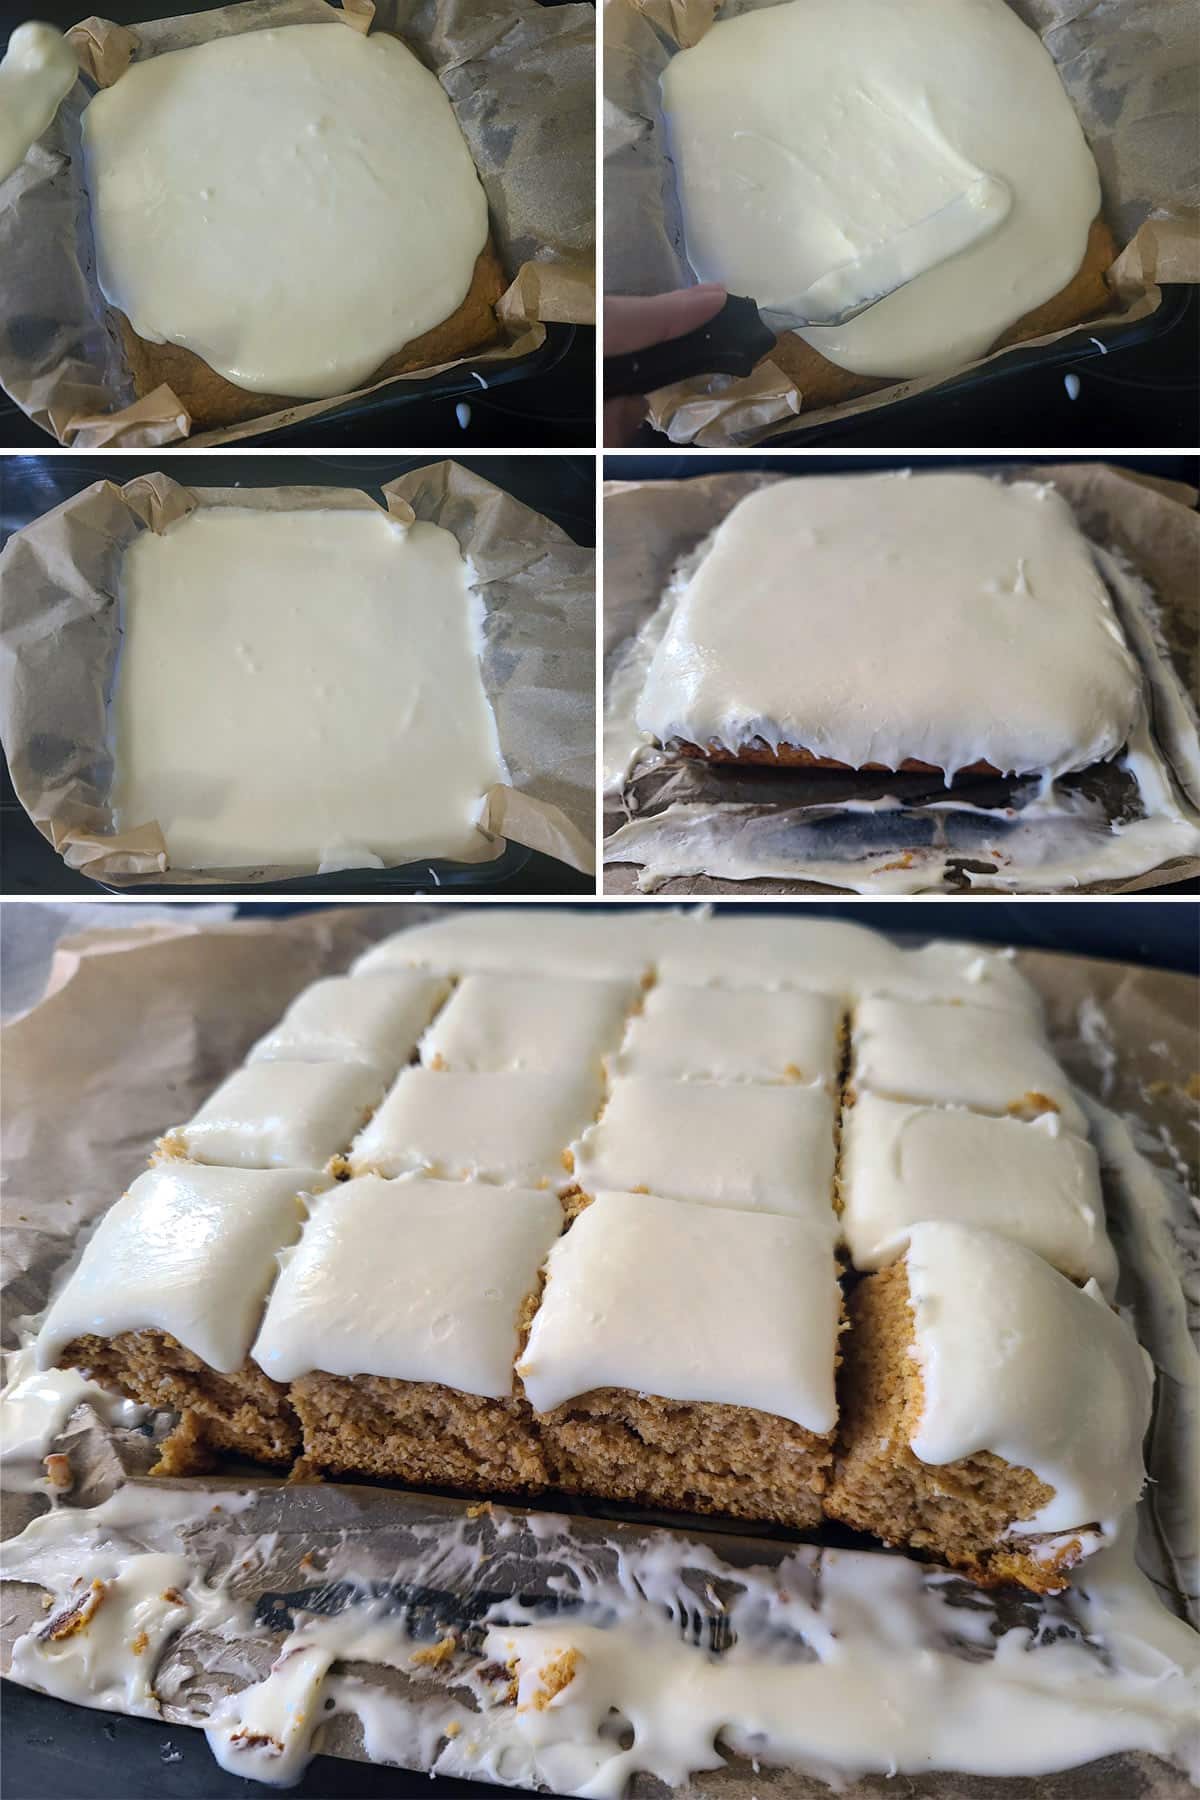 A 5 part image showing the cream cheese icing being spread on bars, then the bars cut.